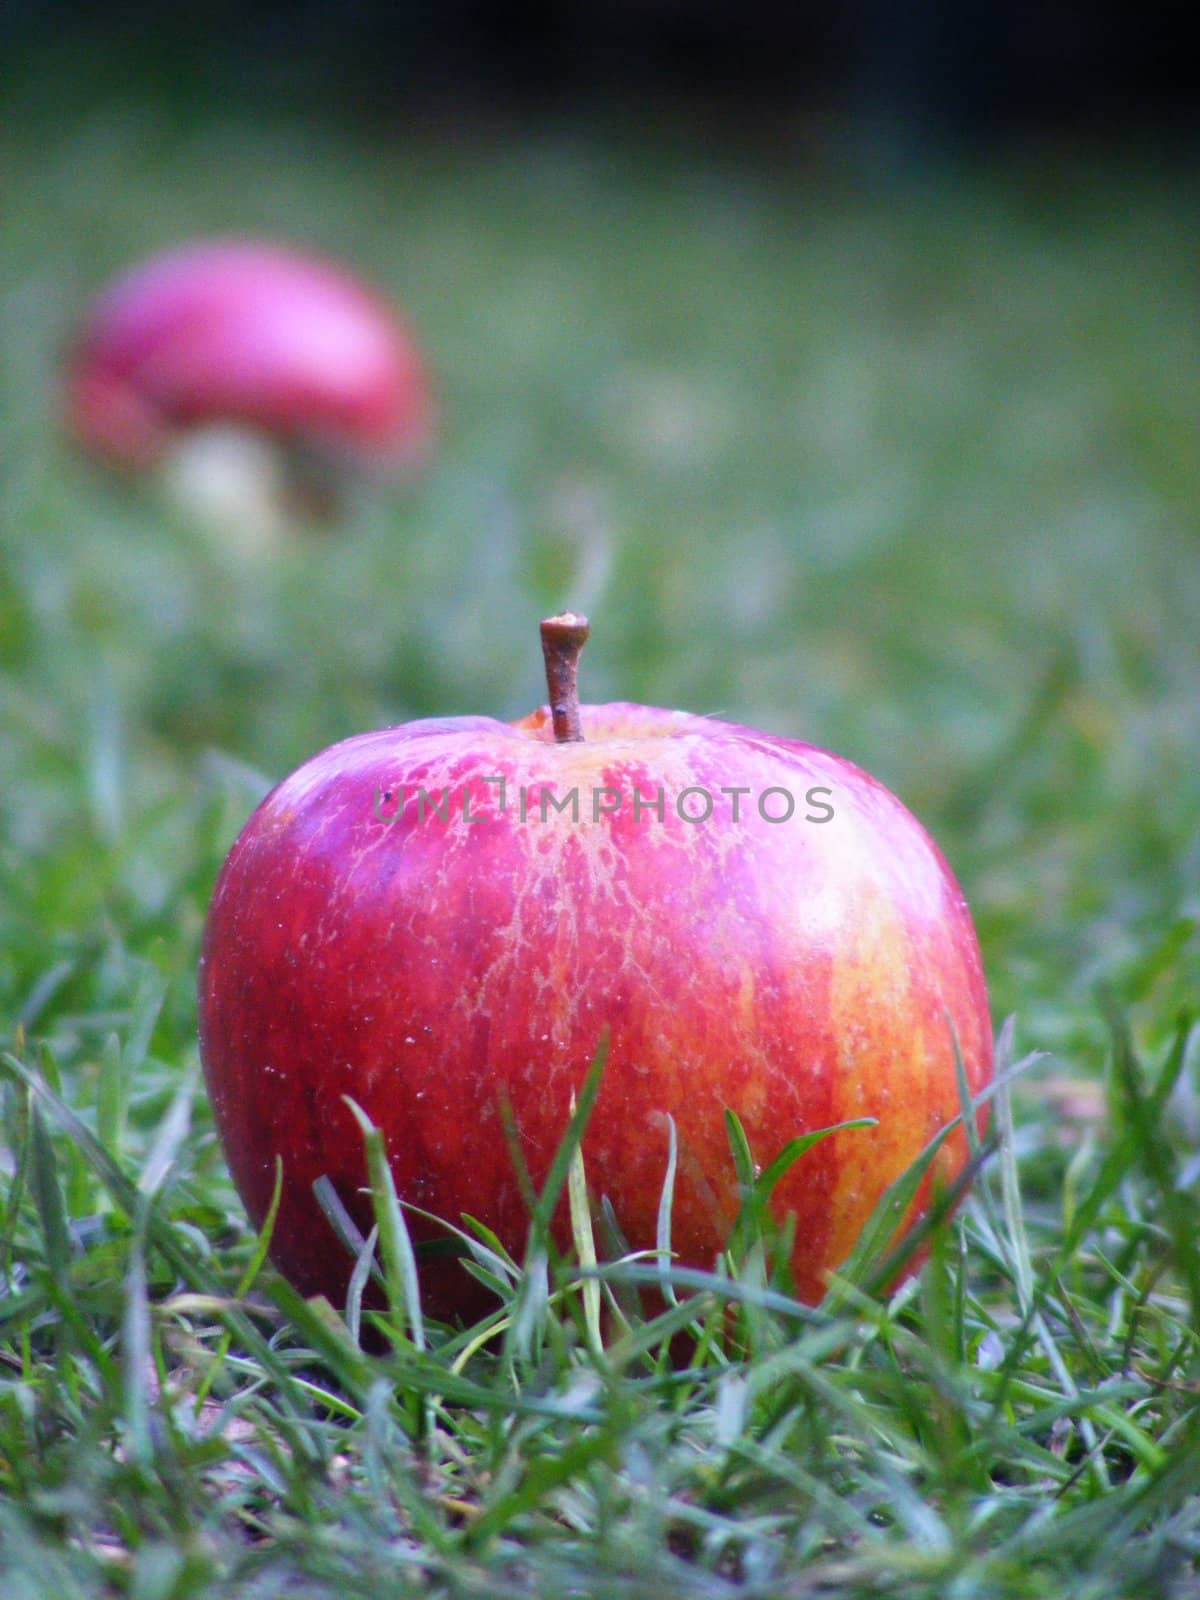 A close up photograph of a red apple on the ground.